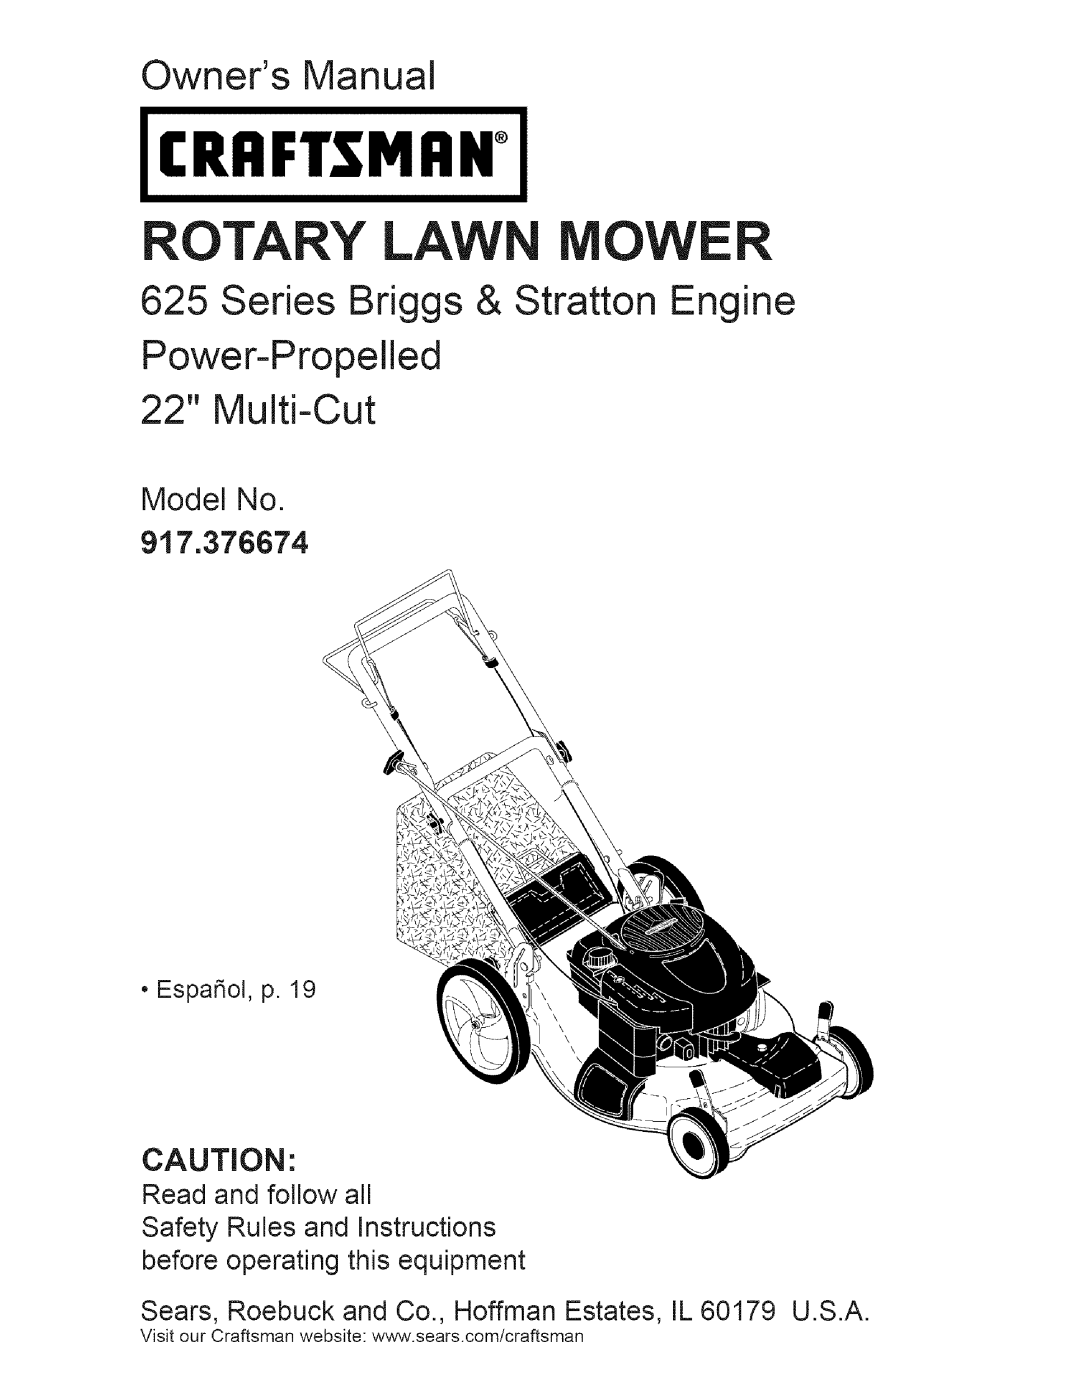 Craftsman owner manual Rotary Mower, Model No 917.376674, Craftsman, Owners Manual, Series Briggs & Stratton Engine 